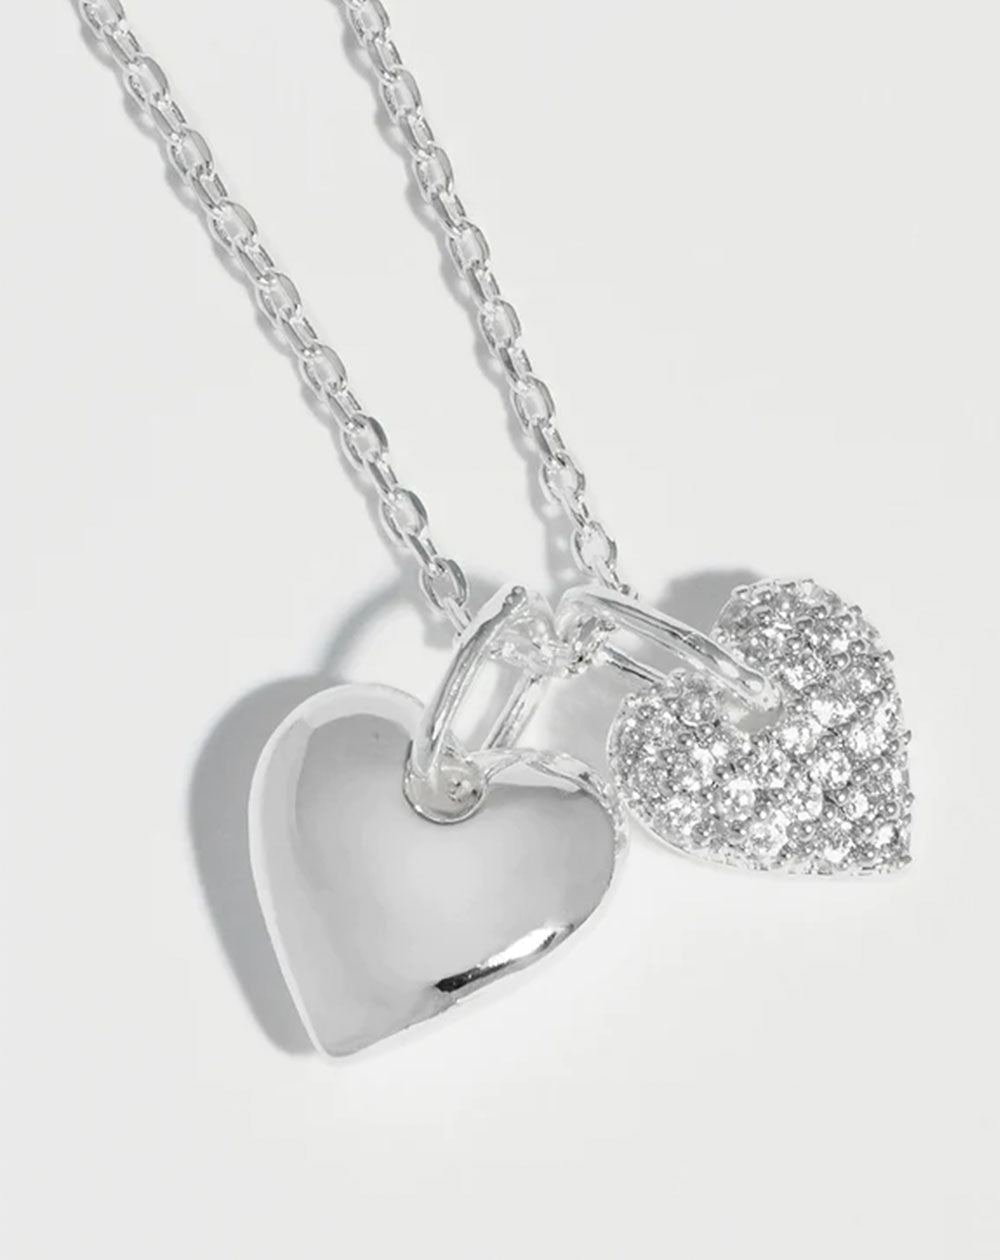 Estella Bartlett - Pave Double Heart Charm Necklace - Silver Plated